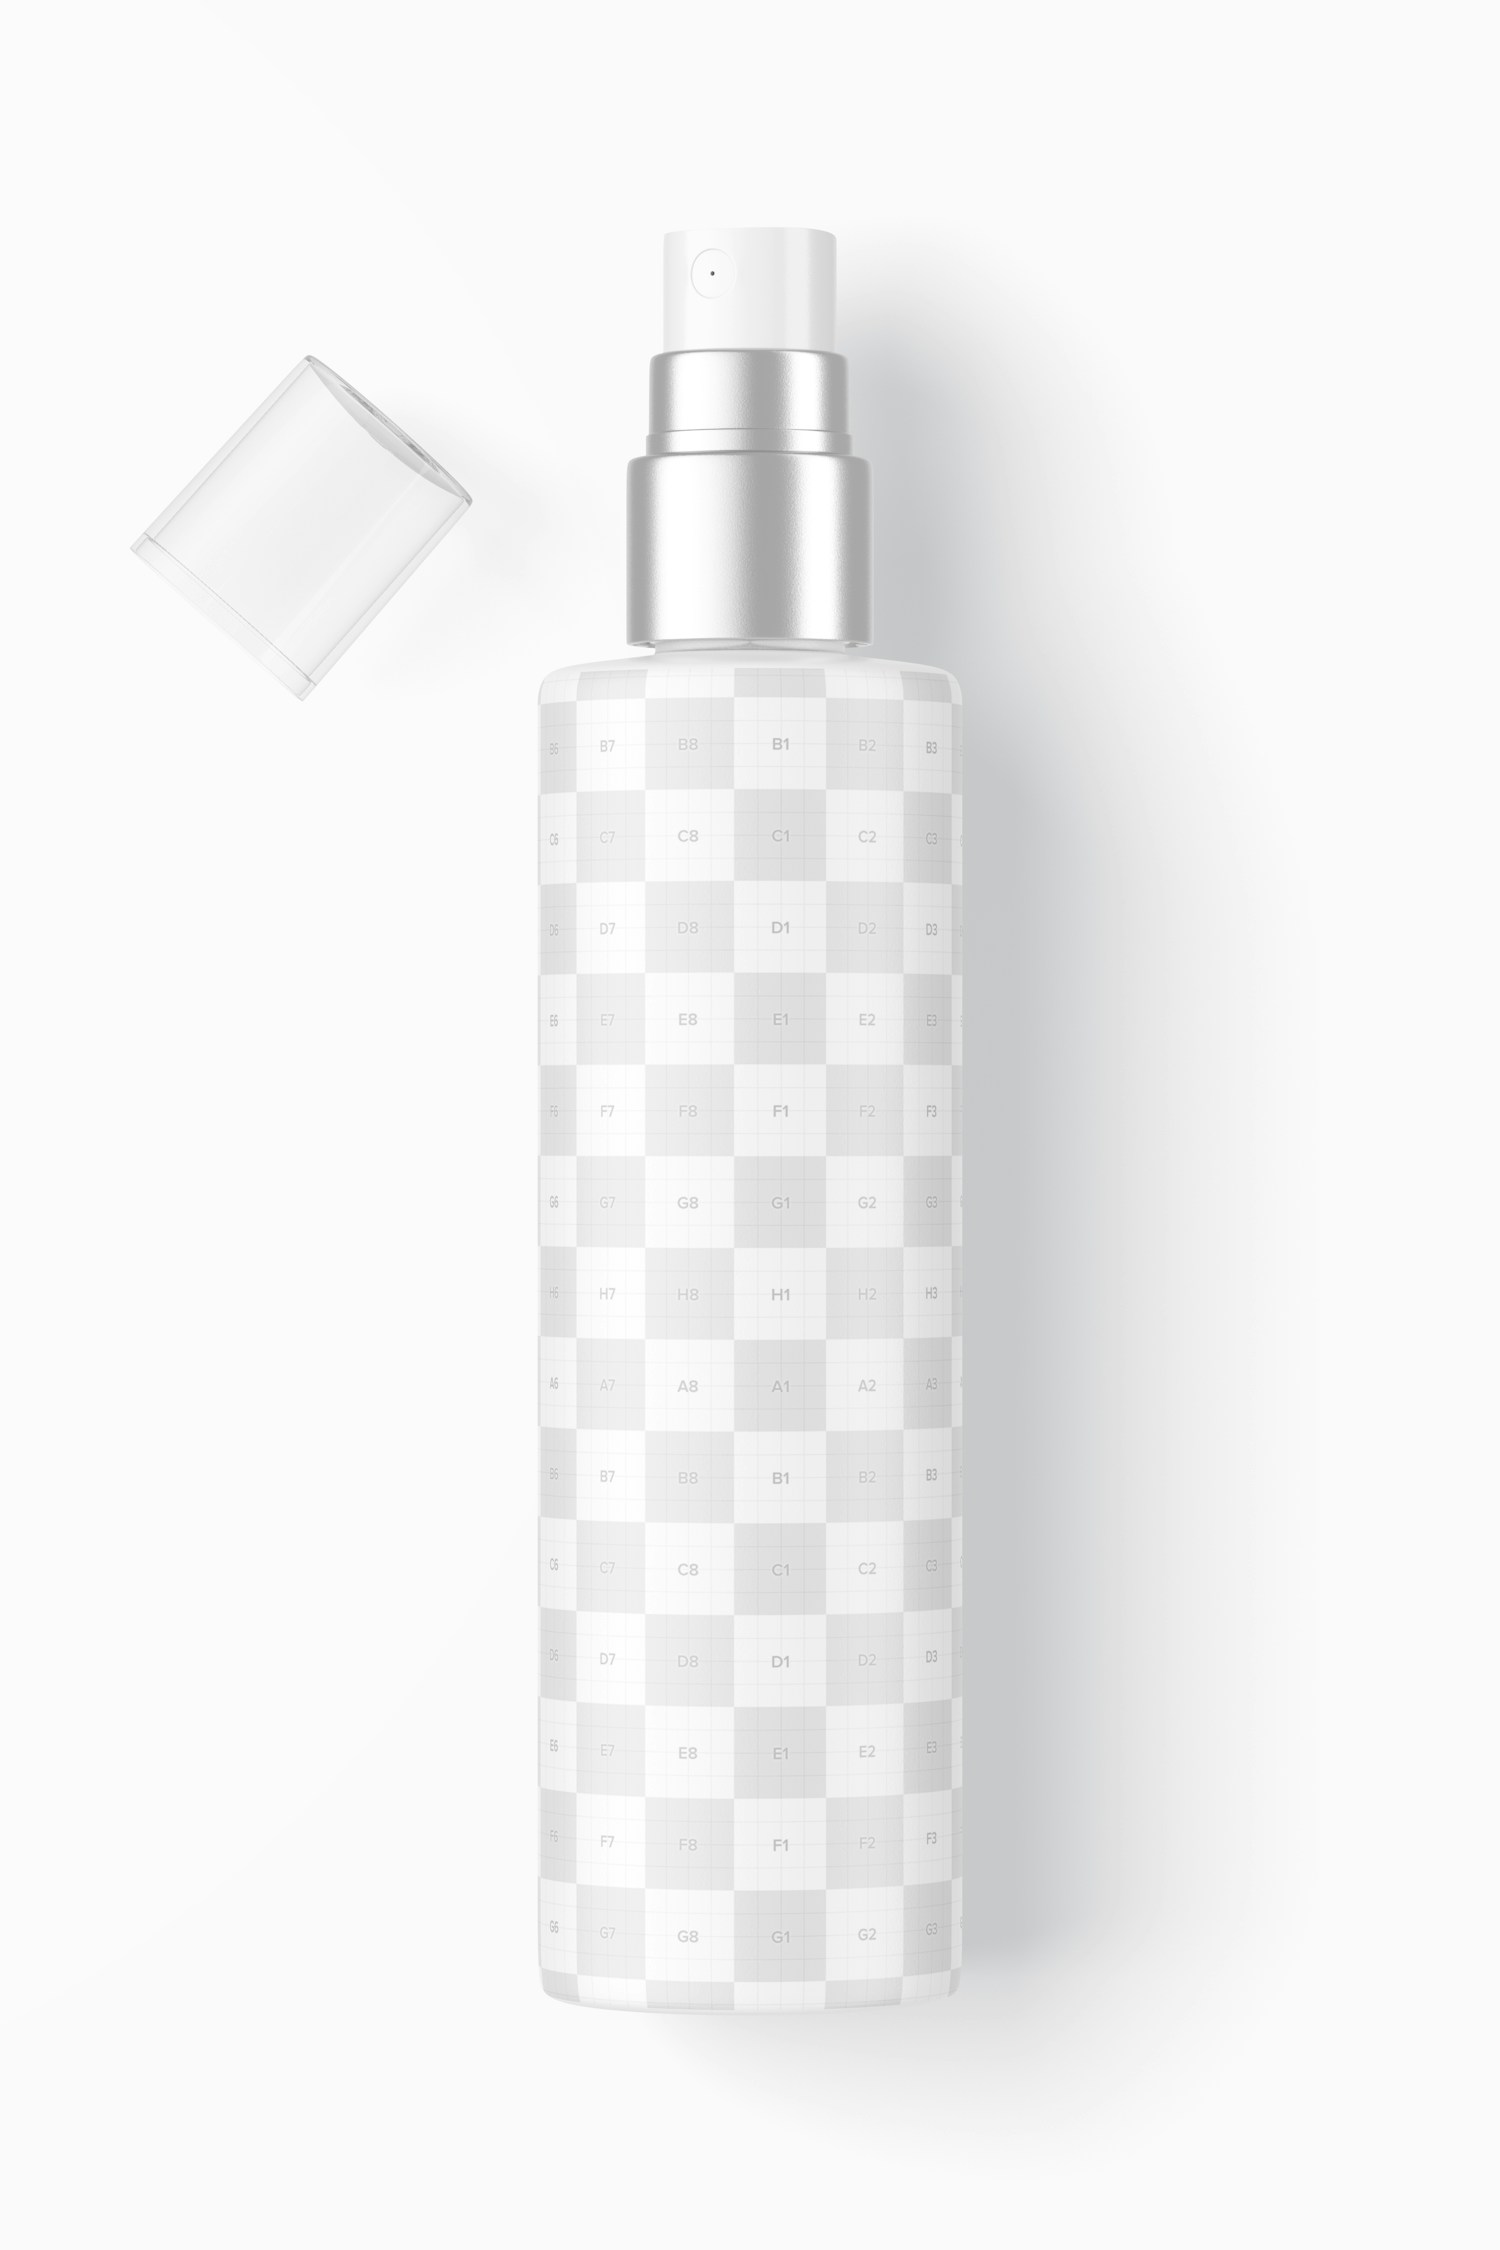 4 Oz Spray Bottle Mockup, Top View Opened